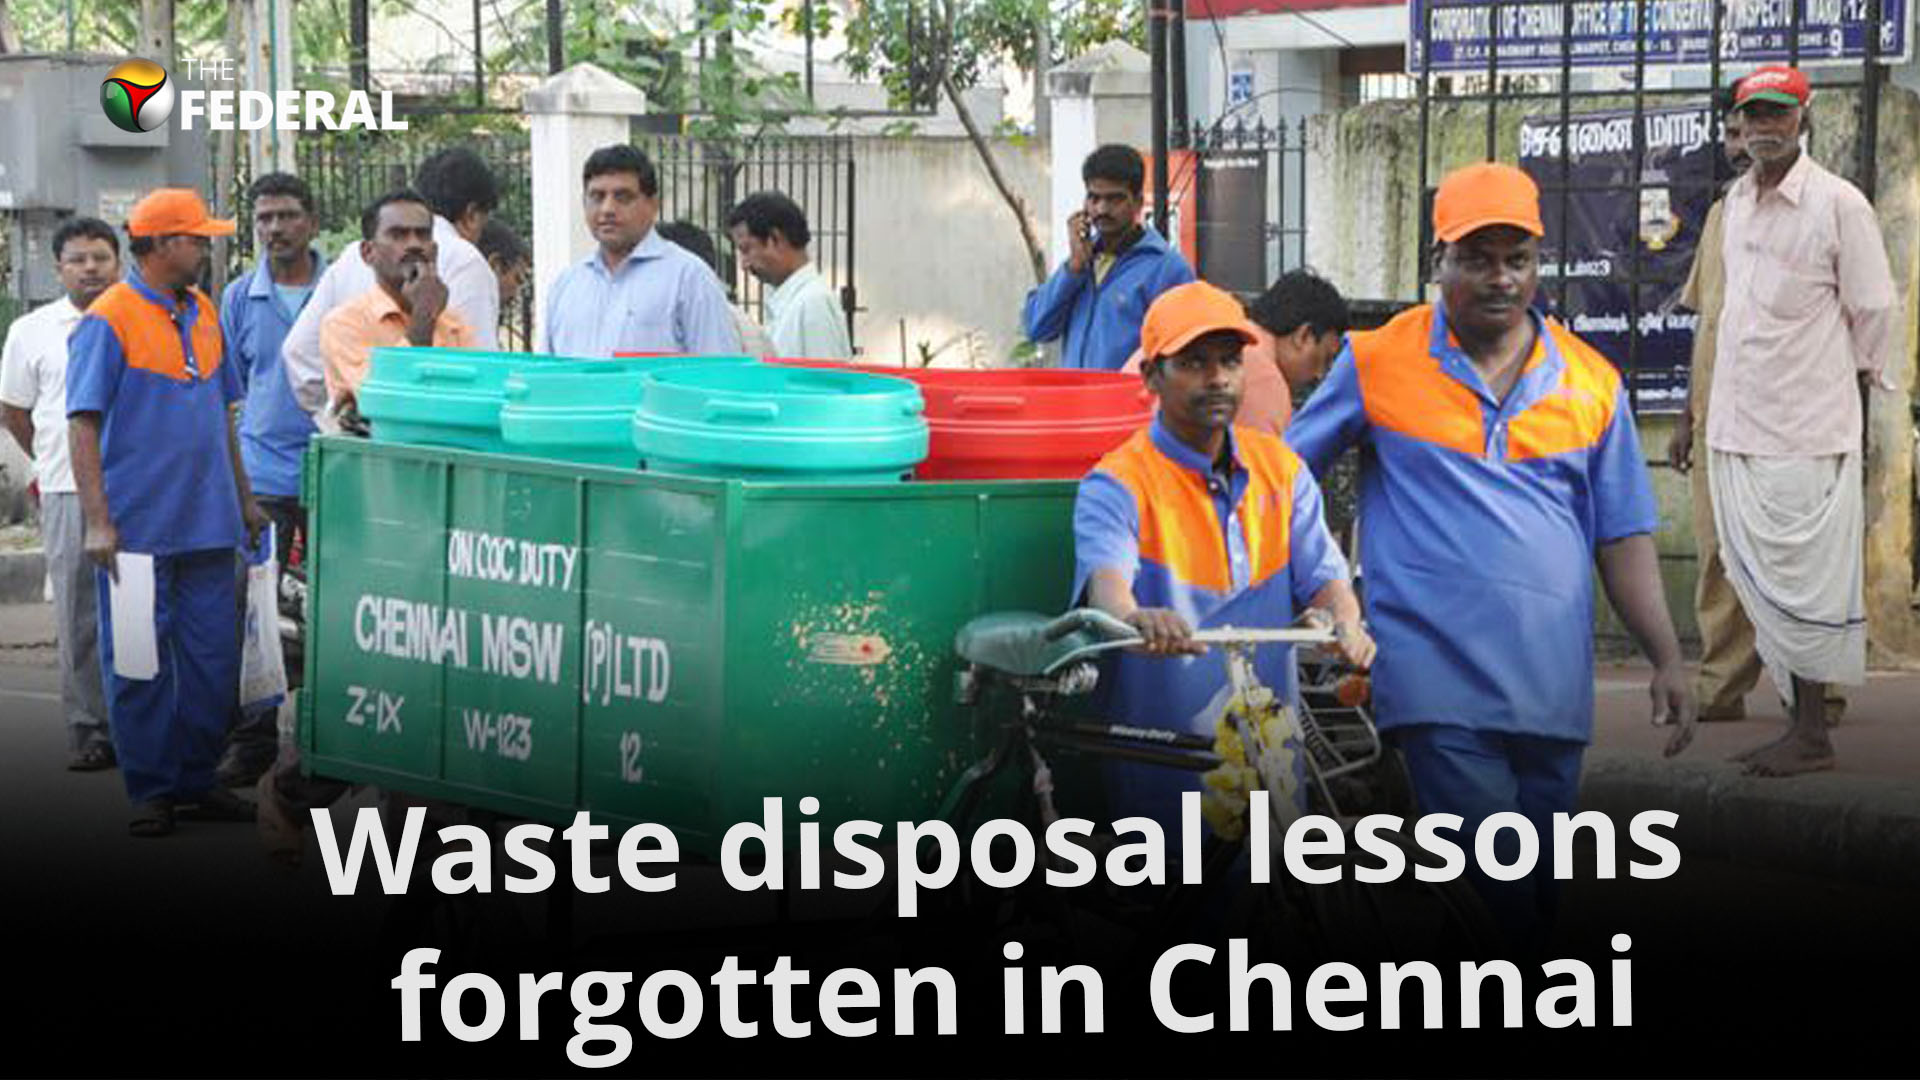 Distracted by COVID, Chennai forgets waste disposal lessons